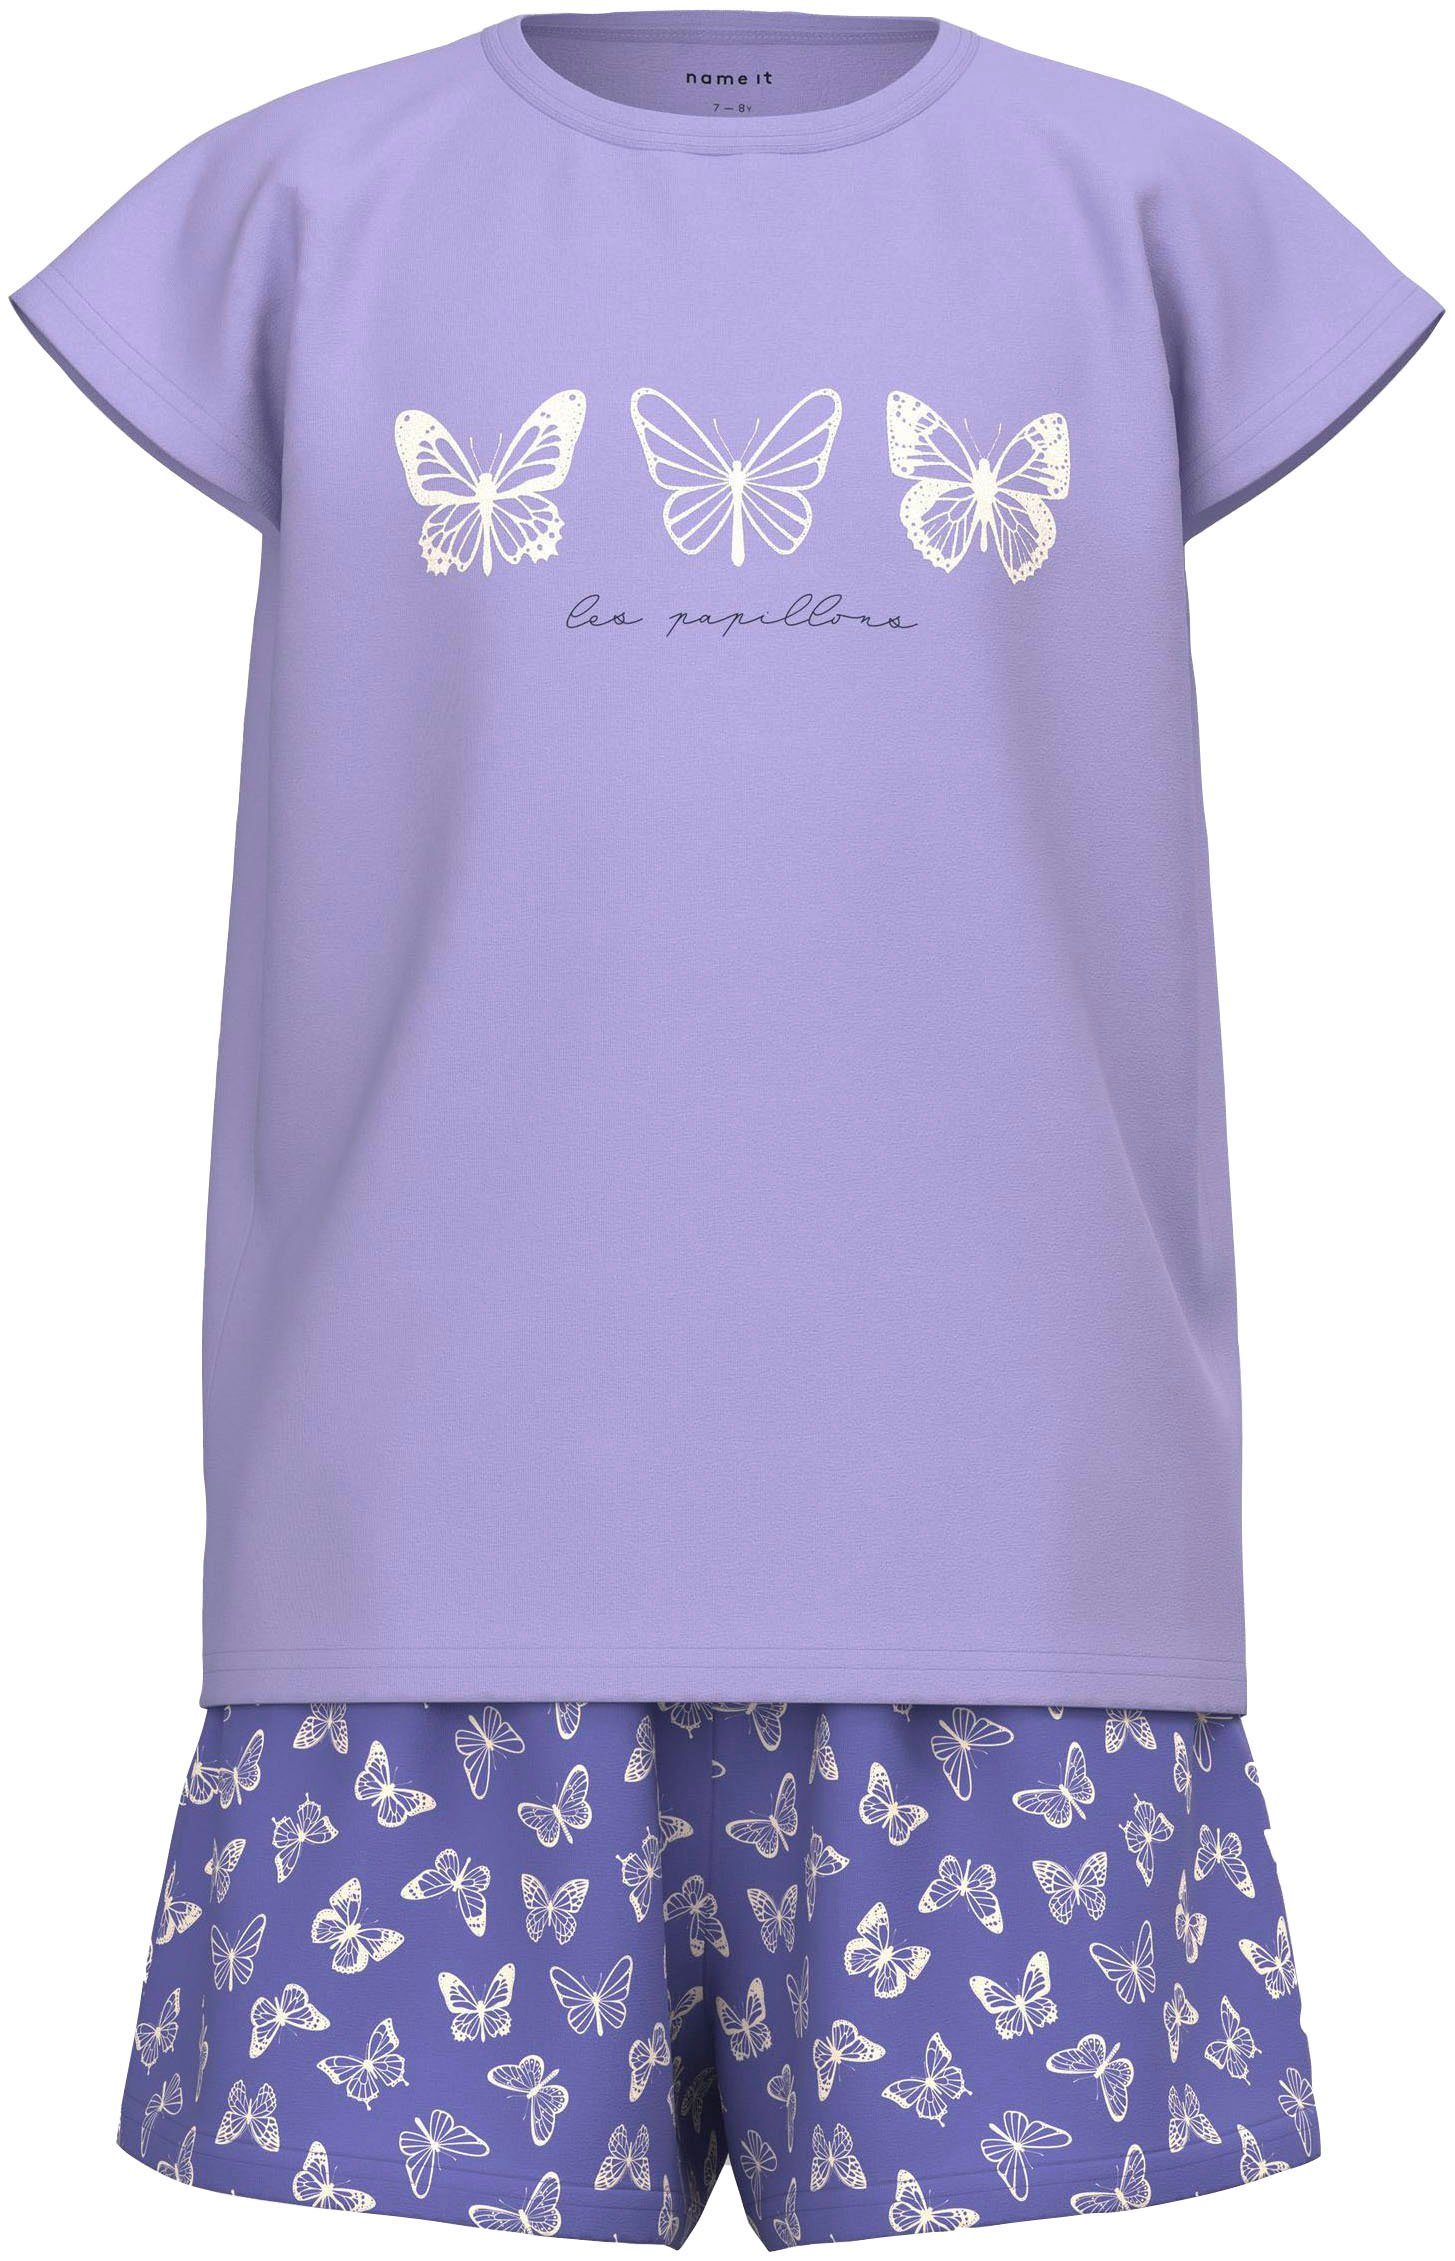 tlg) (Packung, CAP Name BUTTERFLY 2 Shorty It mit NOOS NKFNIGHTSET Druck Schmetterling